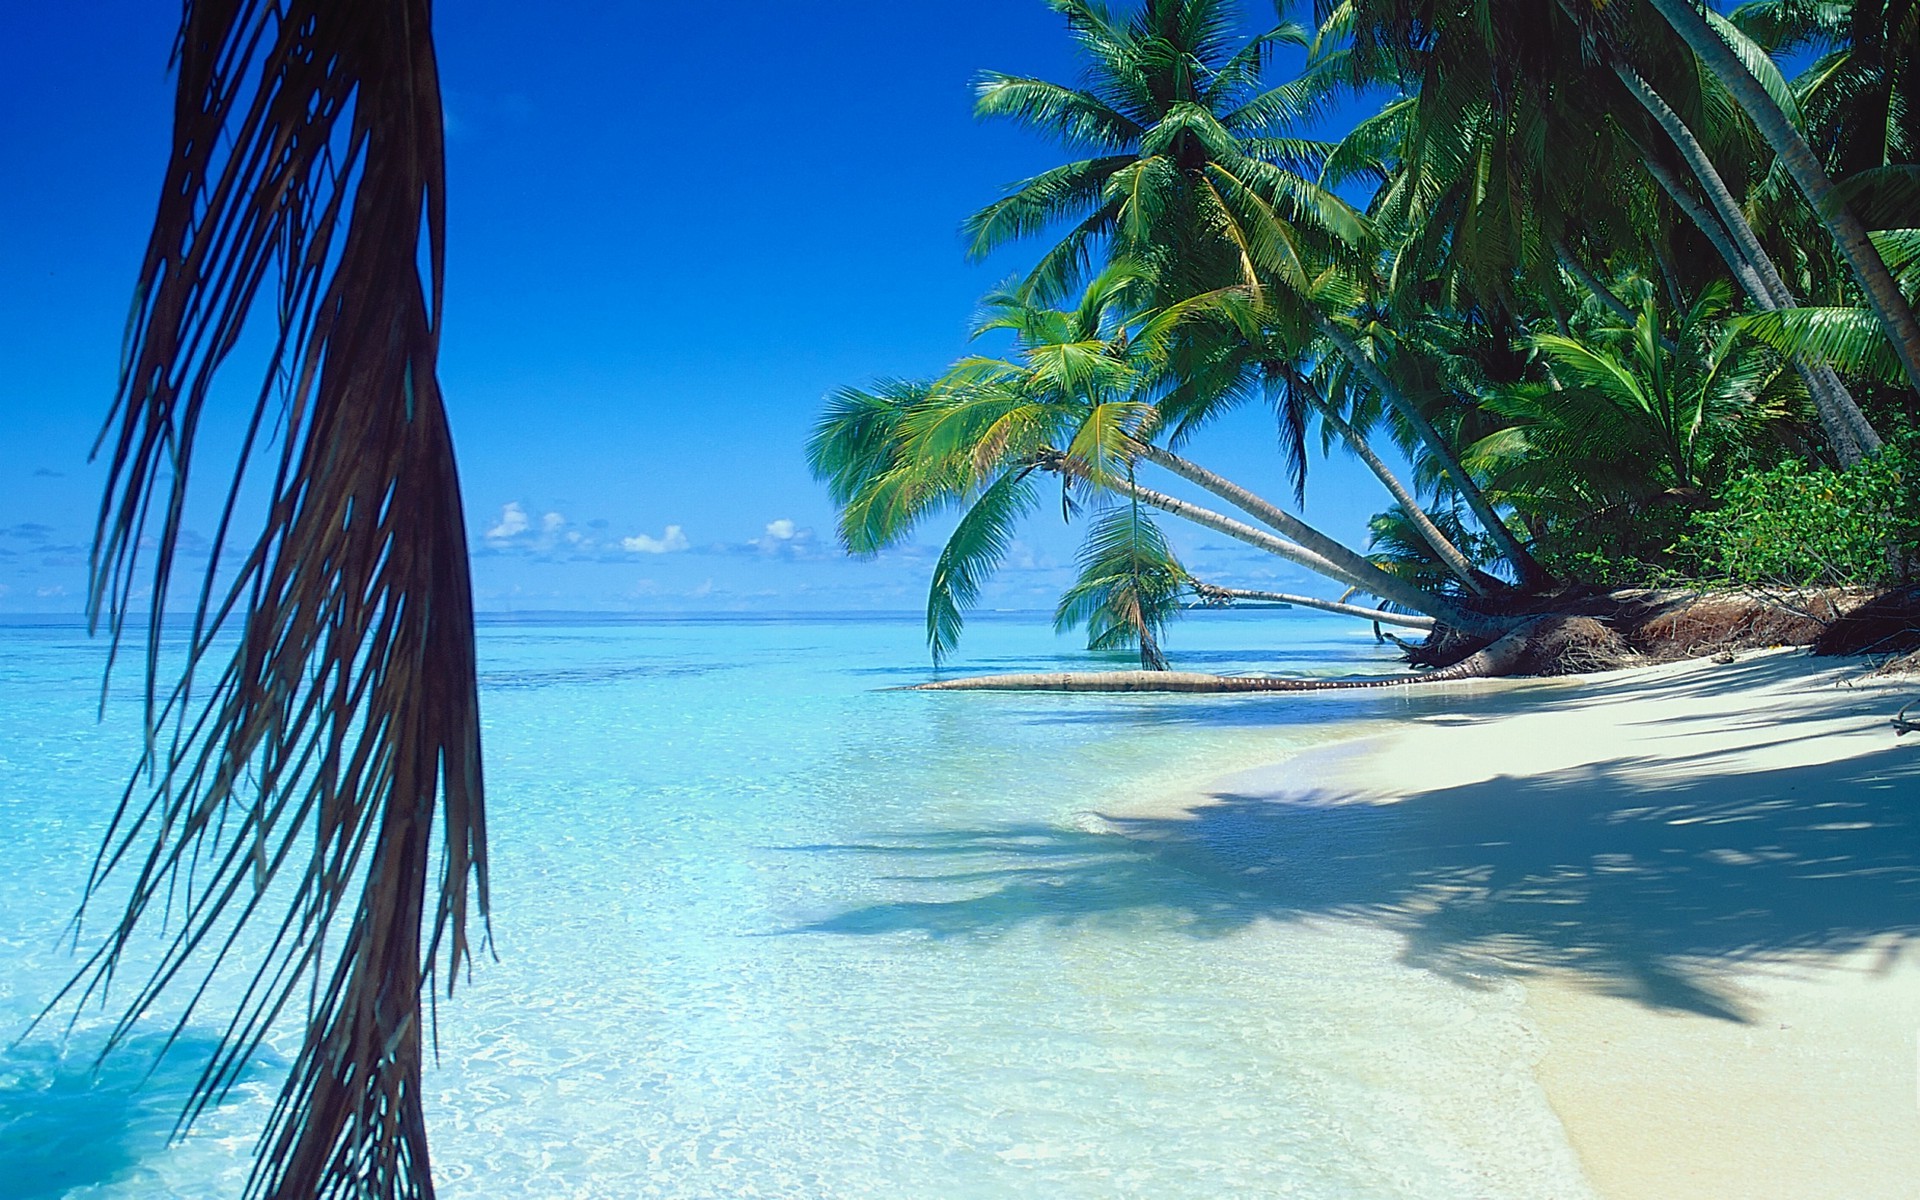 nature, Landscape, Sea, Beach, Palm Trees, Sand, Tropical, Island, Summer, Water, Vacations Wallpaper